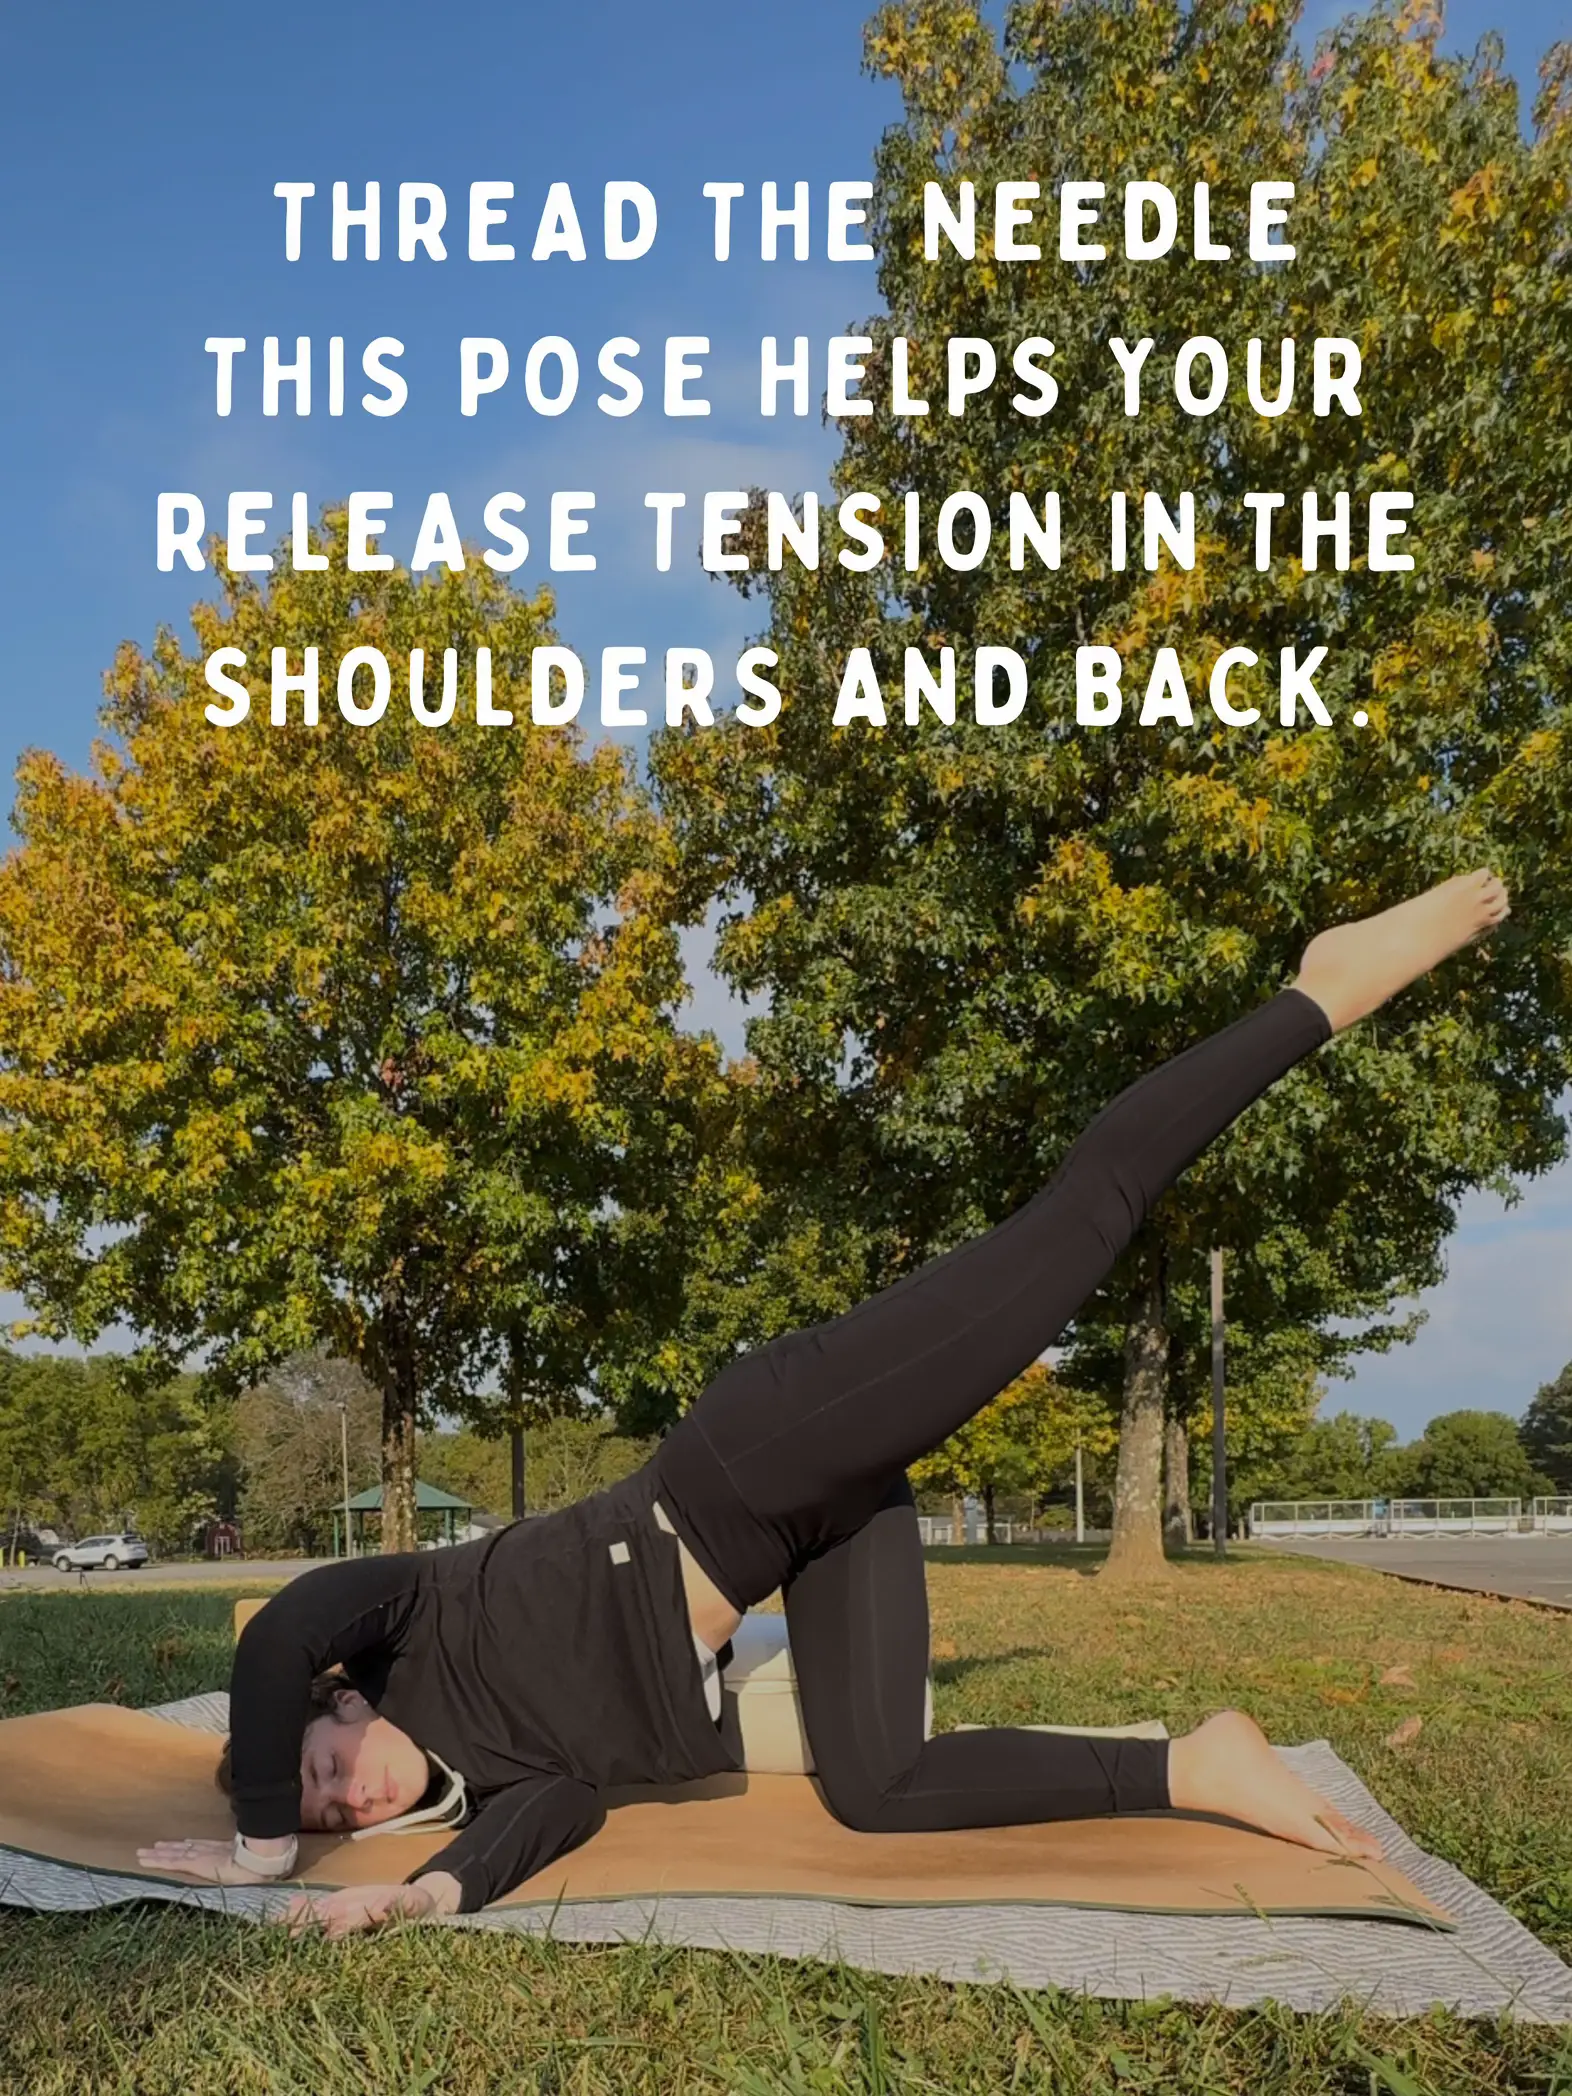 Two Moves for Instant Back Pain Relief #backpain #backpainrelief